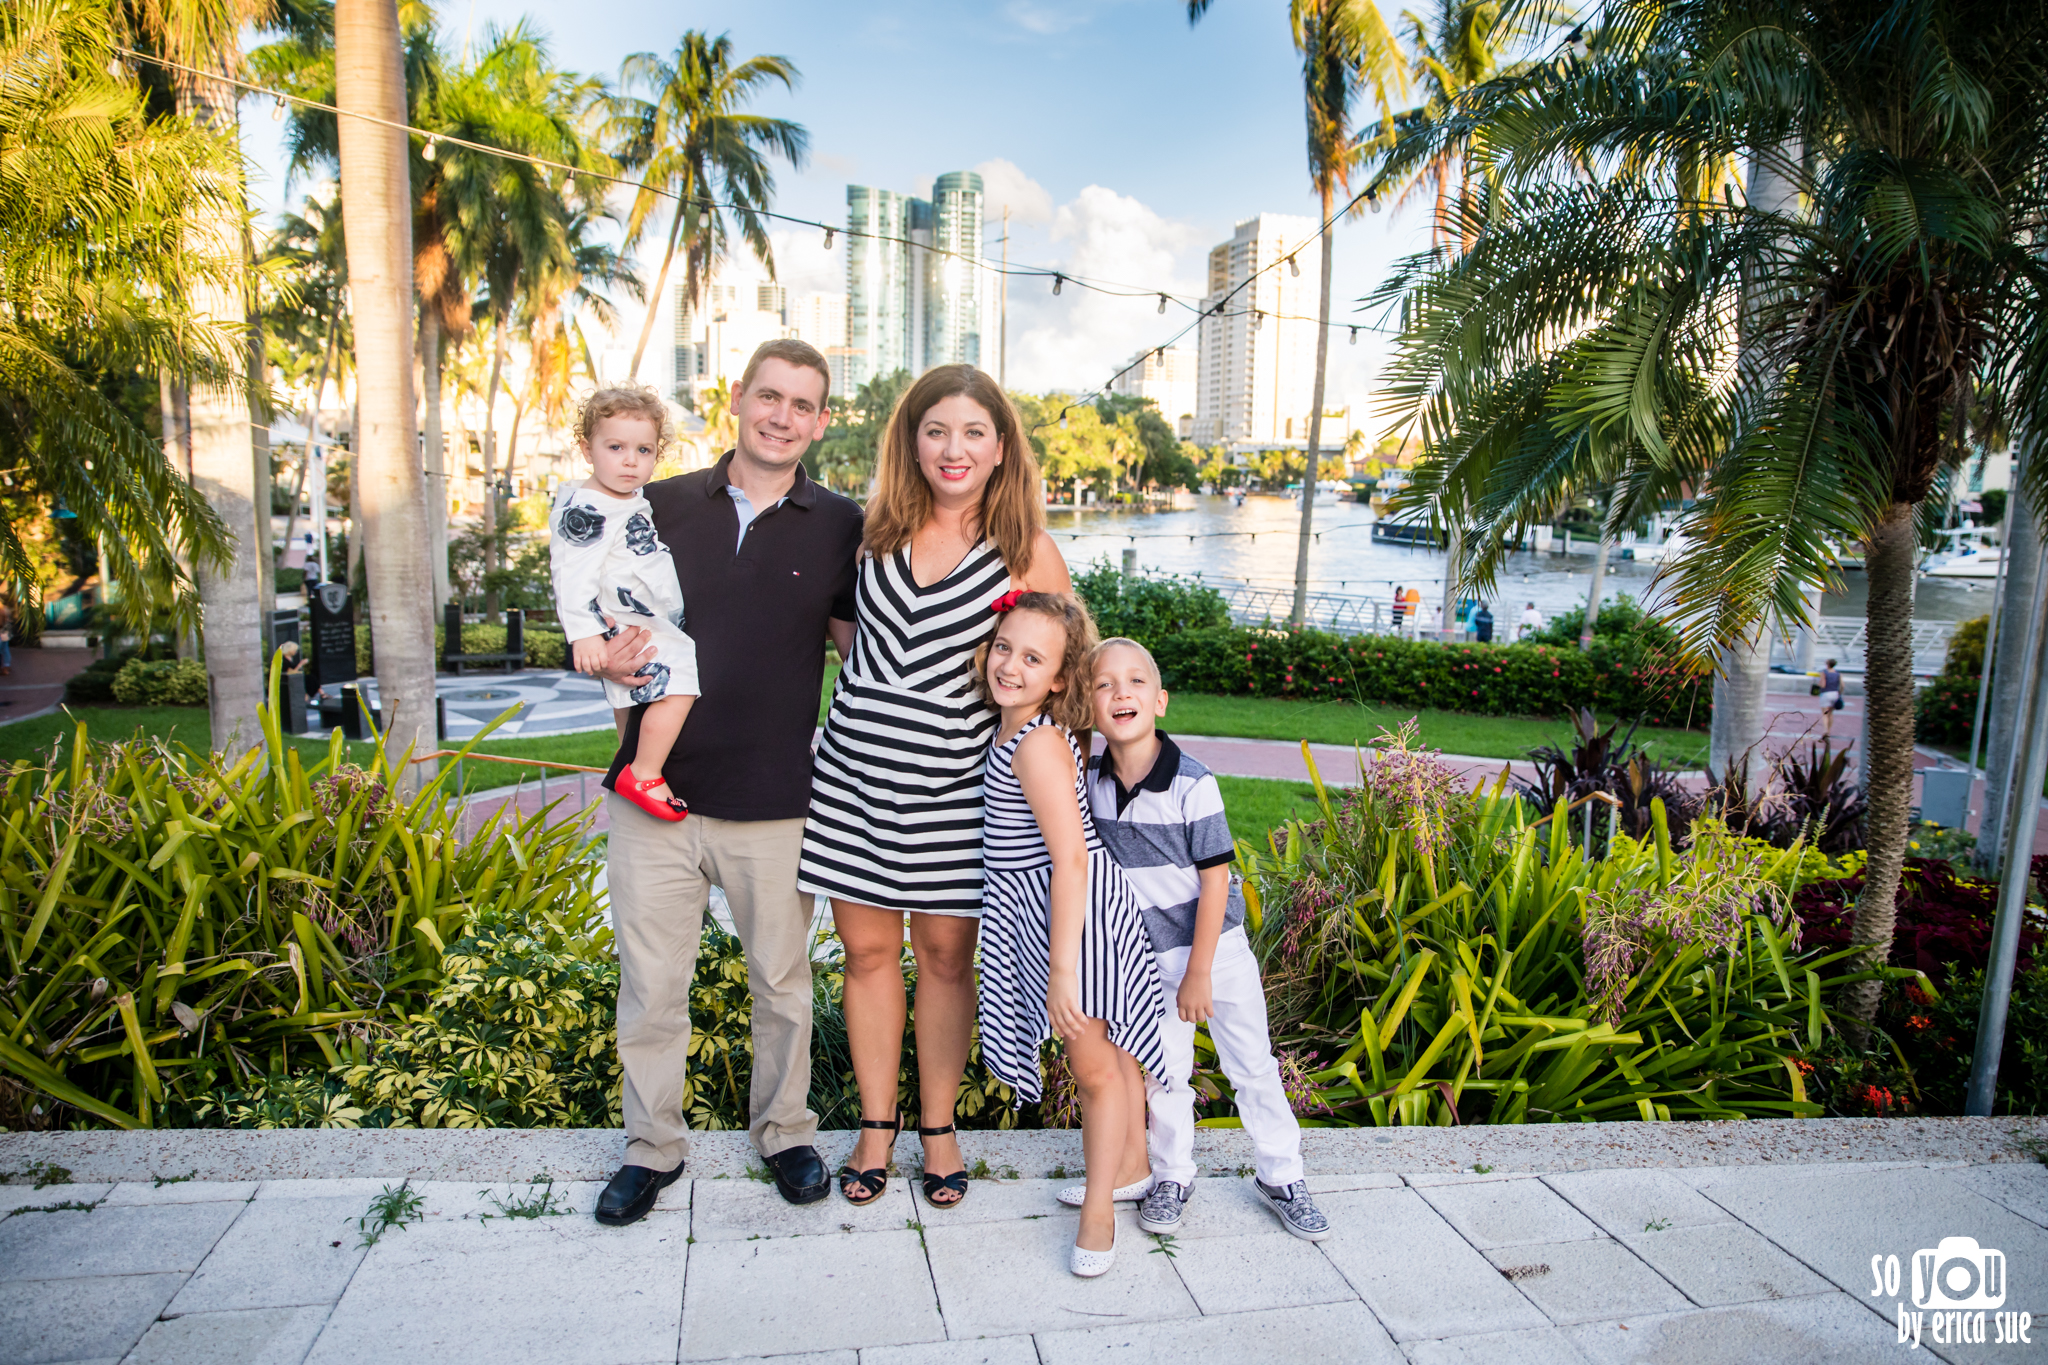 ft-lauderdale-lifestyle-family-photography-so-you-by-erica-sue-0232.jpg